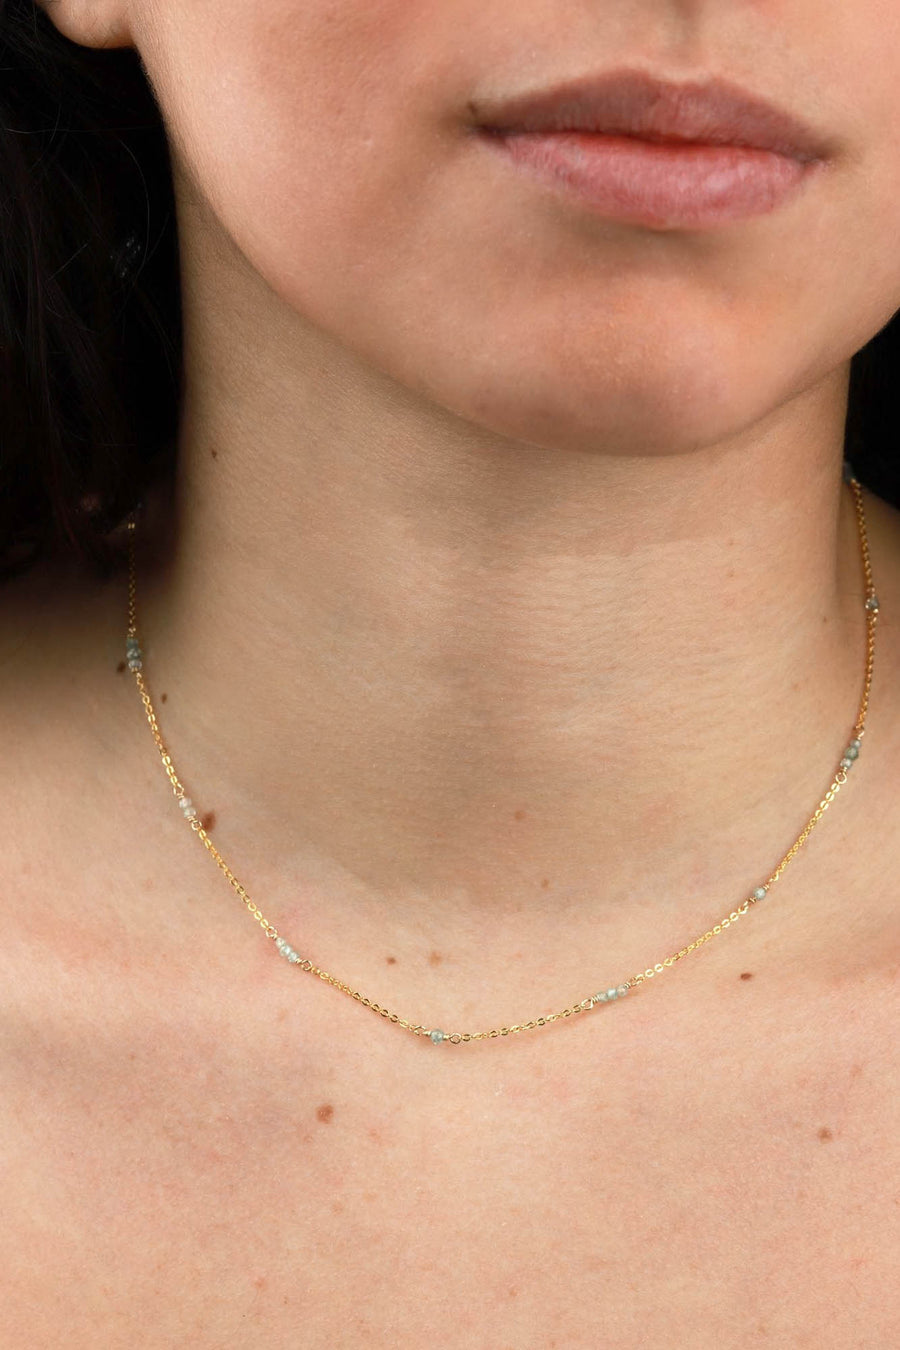 Cause We Care-Stone Station Necklace-Necklaces-14k Gold-fill-Blue Ruby Jewellery-Vancouver Canada